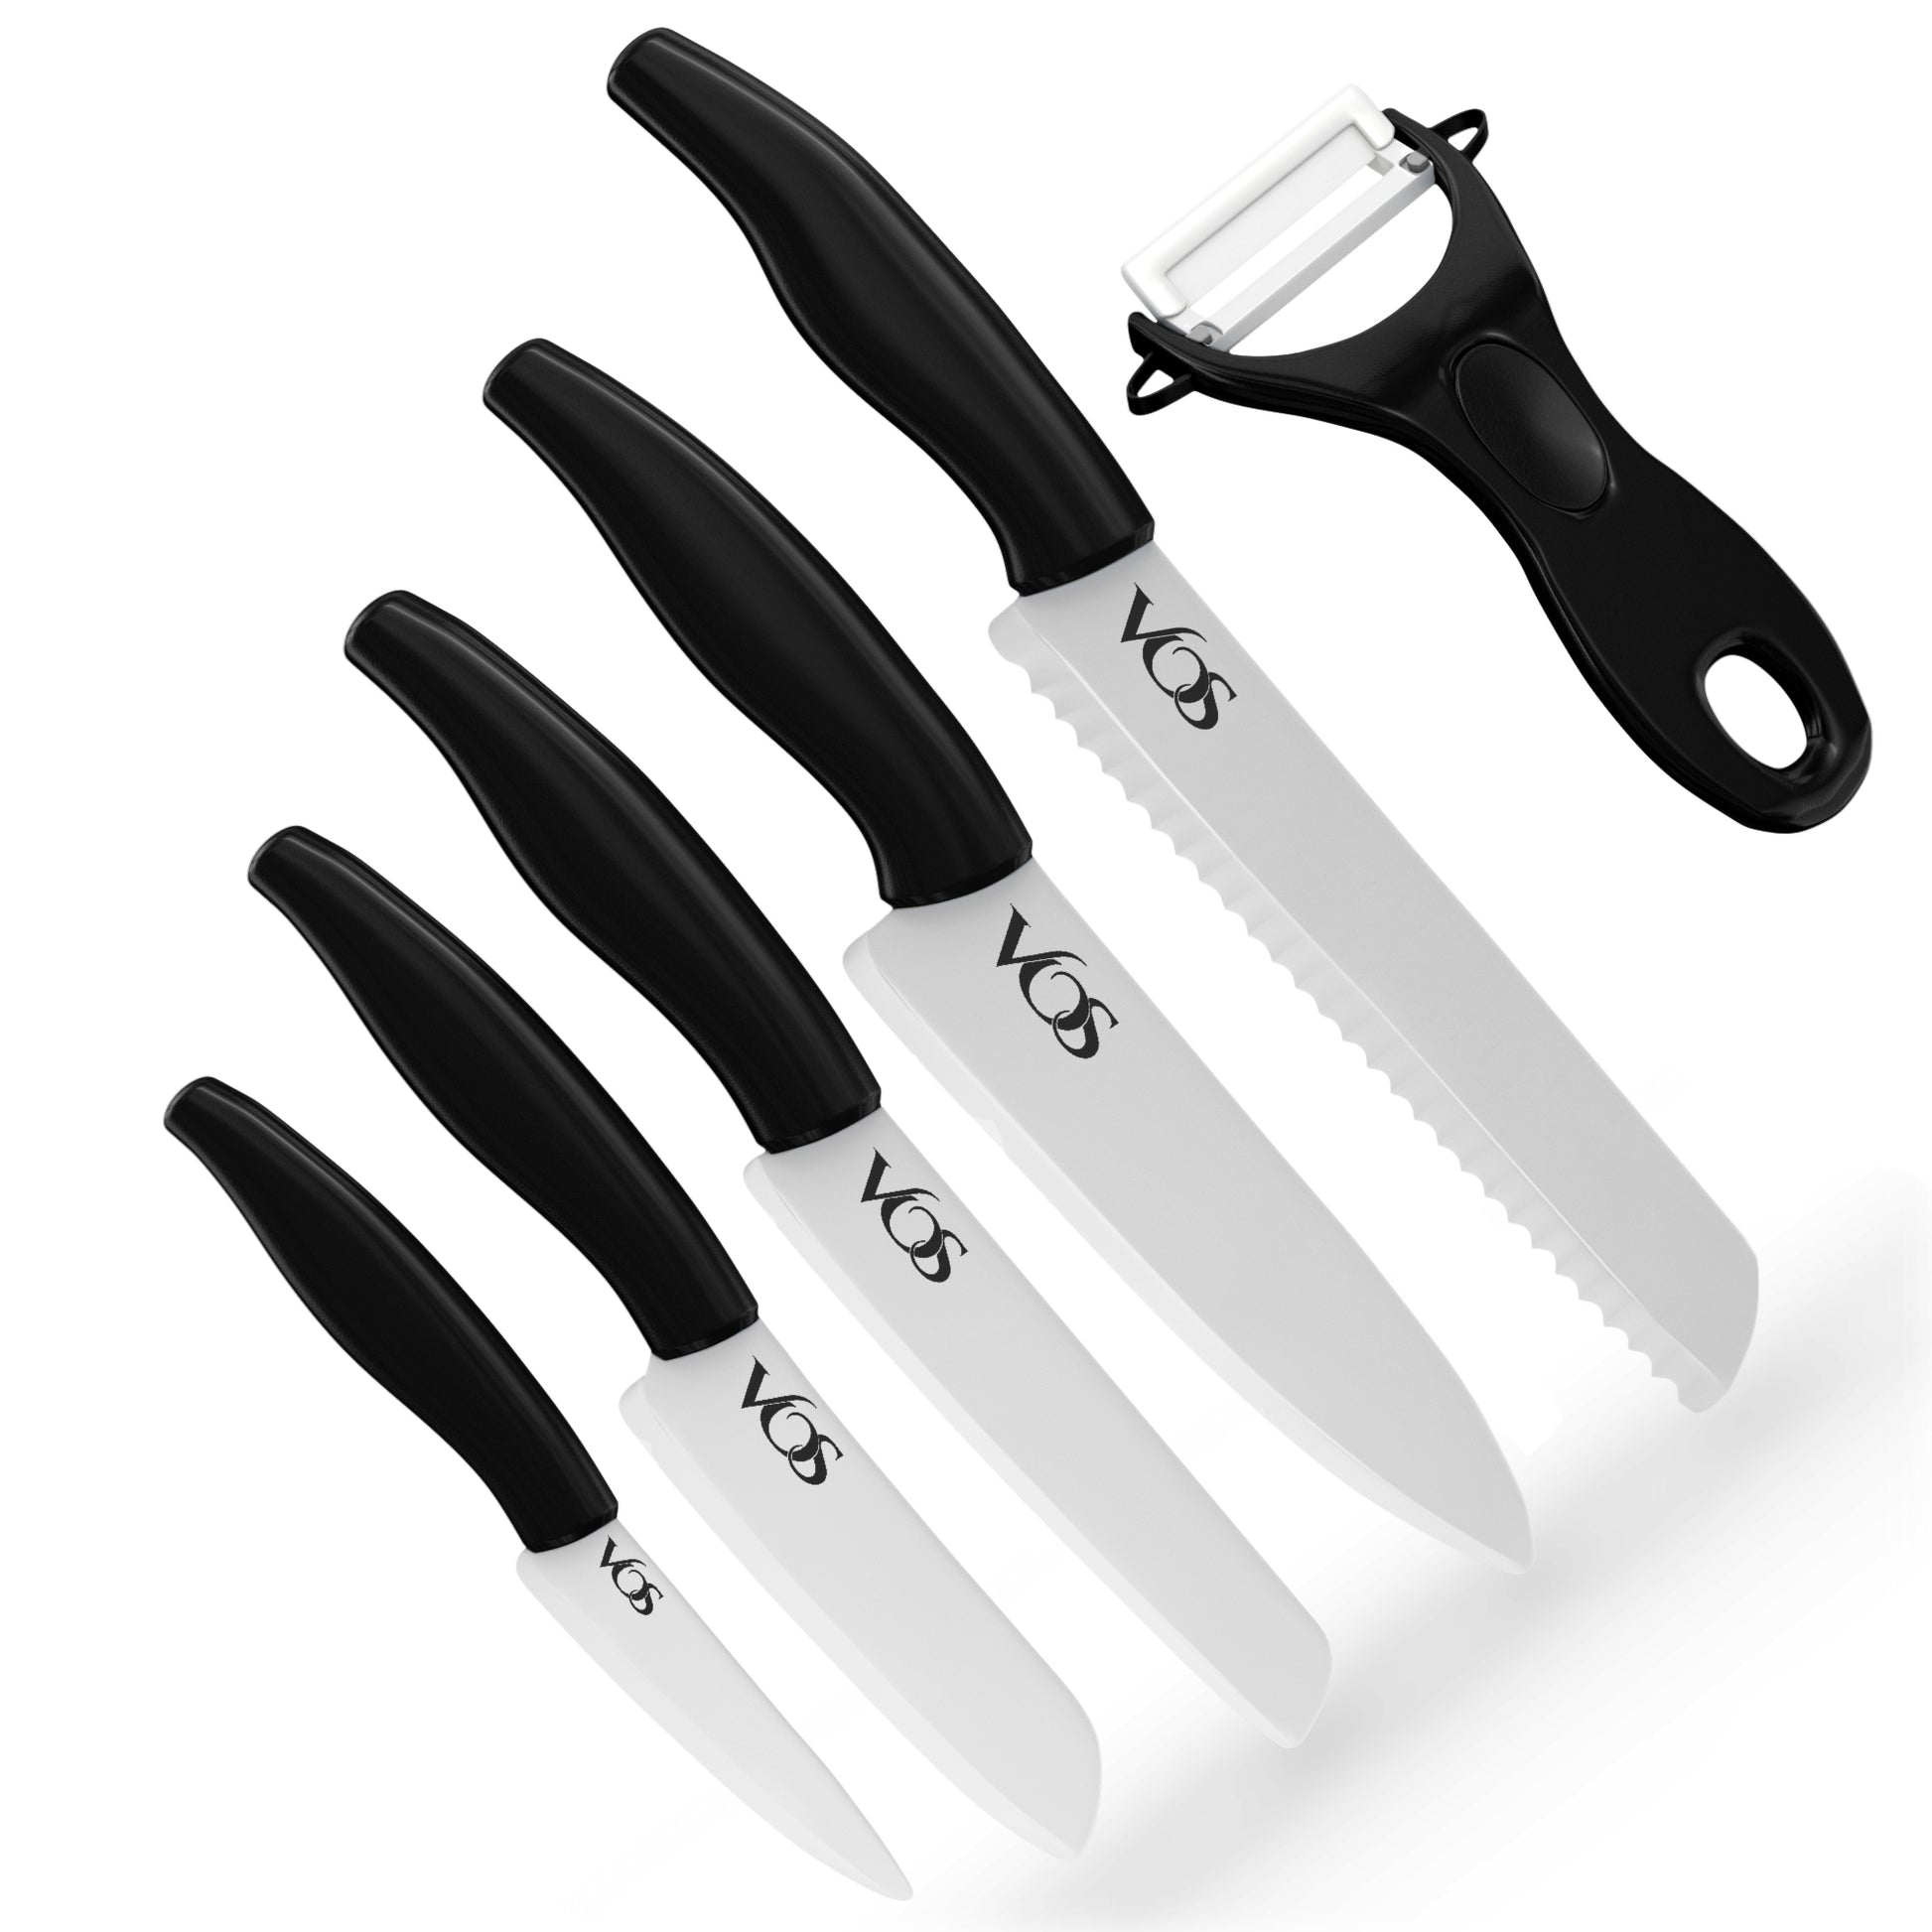 Acko Ceramic Knife Set For Kitchen: 4Pcs High Hardness Ceramic Sharp  Cutting Tools - with Sheath Covers For Home Cooking Meat Vegetables Fruit  Paring Bread (Black) — Stacks Mobile Auto Detailing